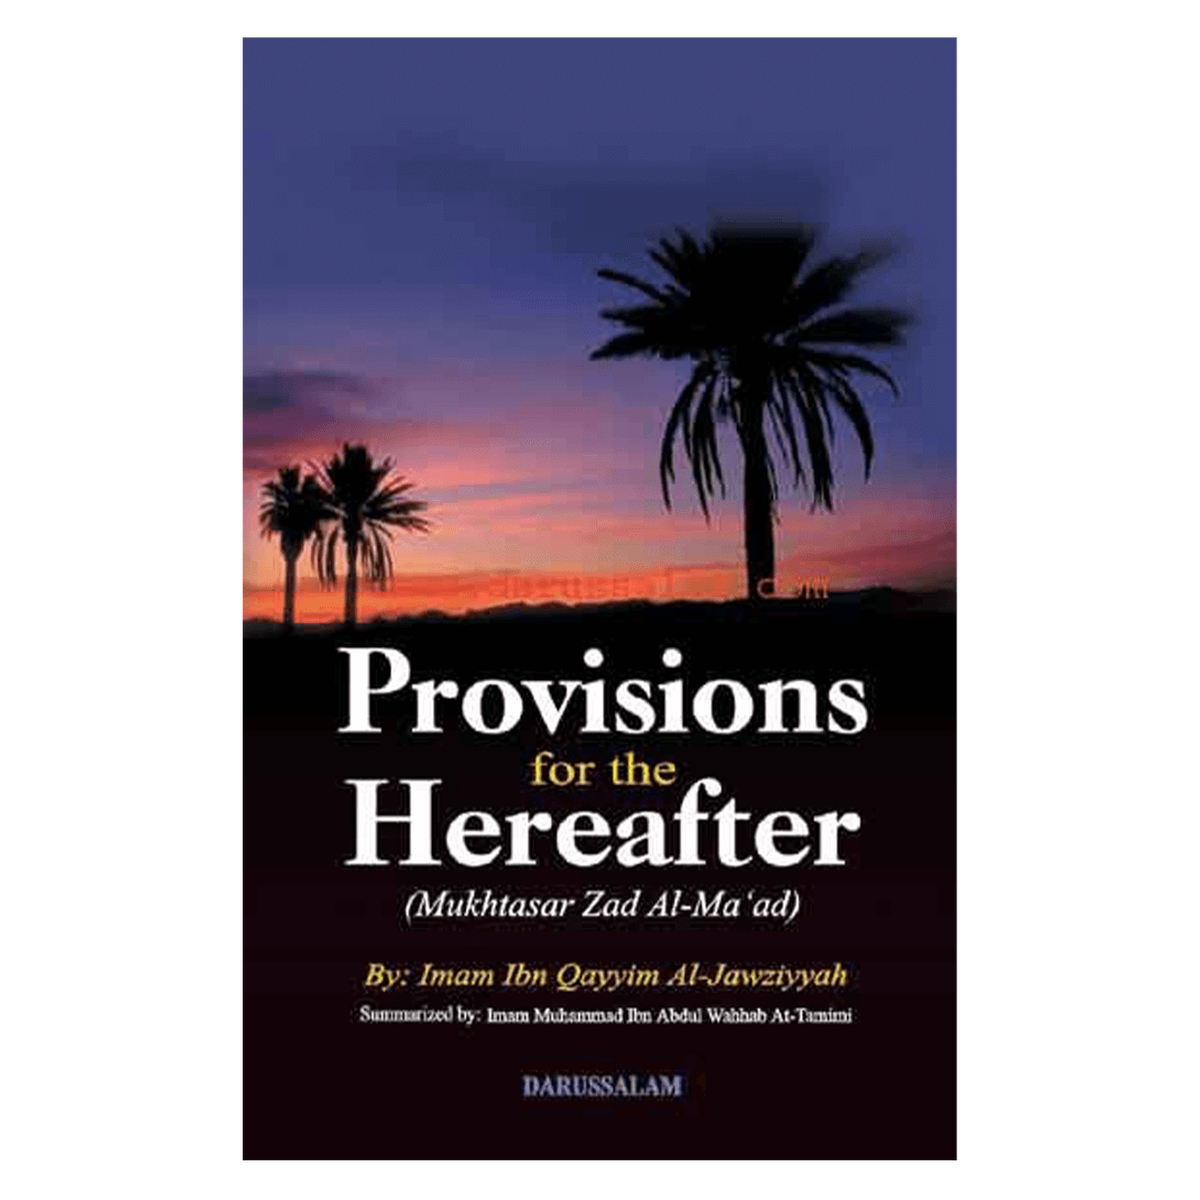 Provisions for the Hereafter